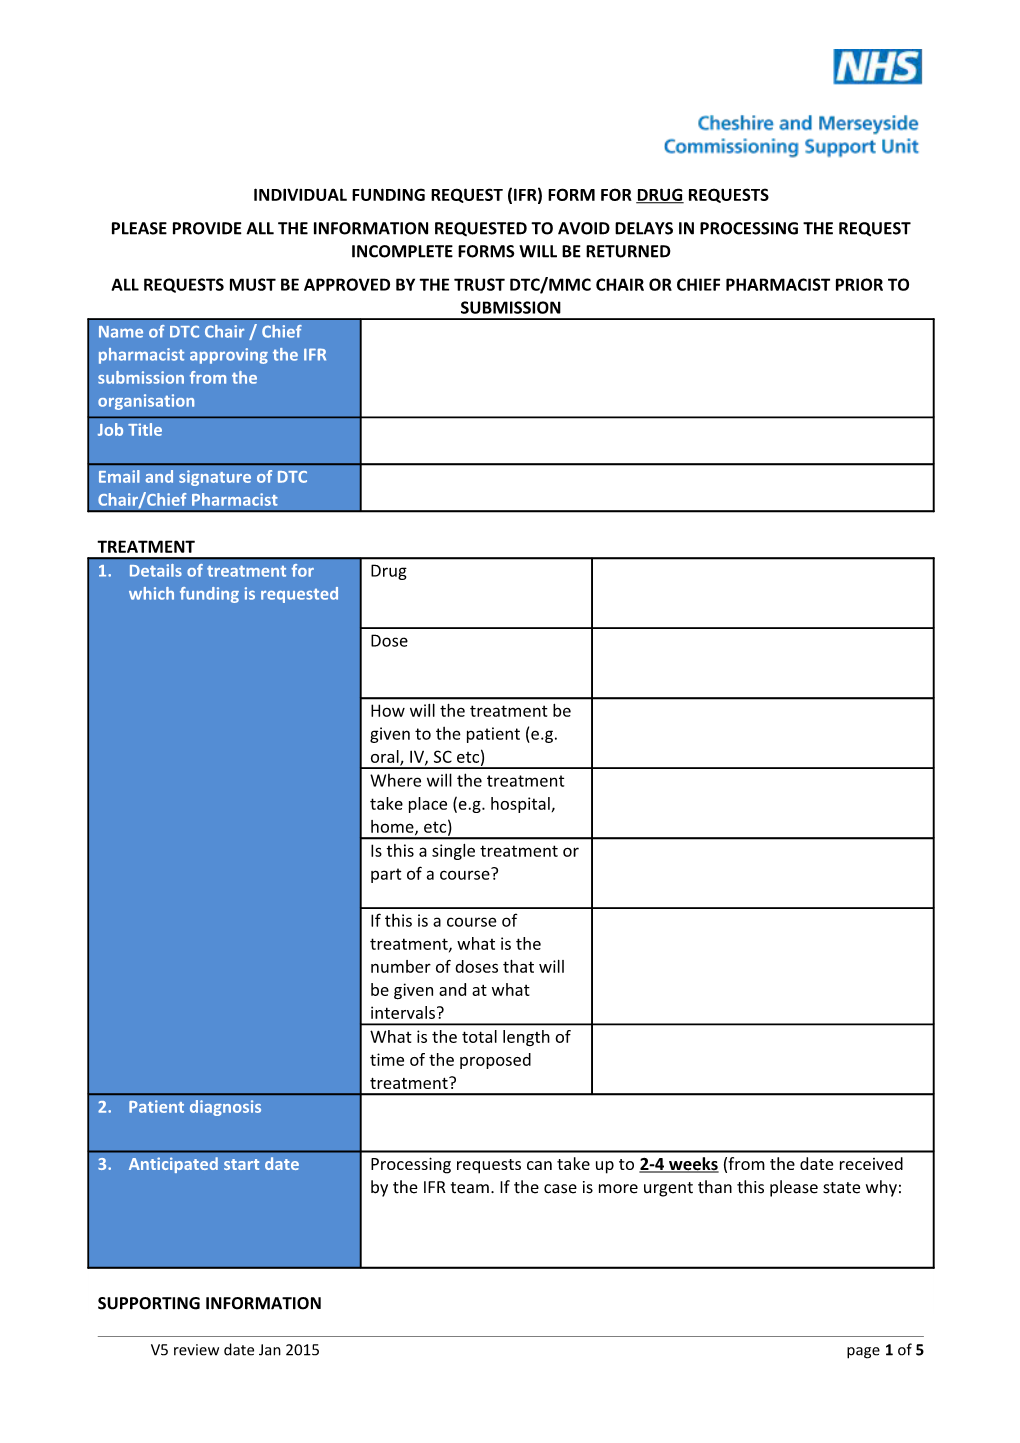 Individual Funding Request (Ifr) Form for Drug Requests